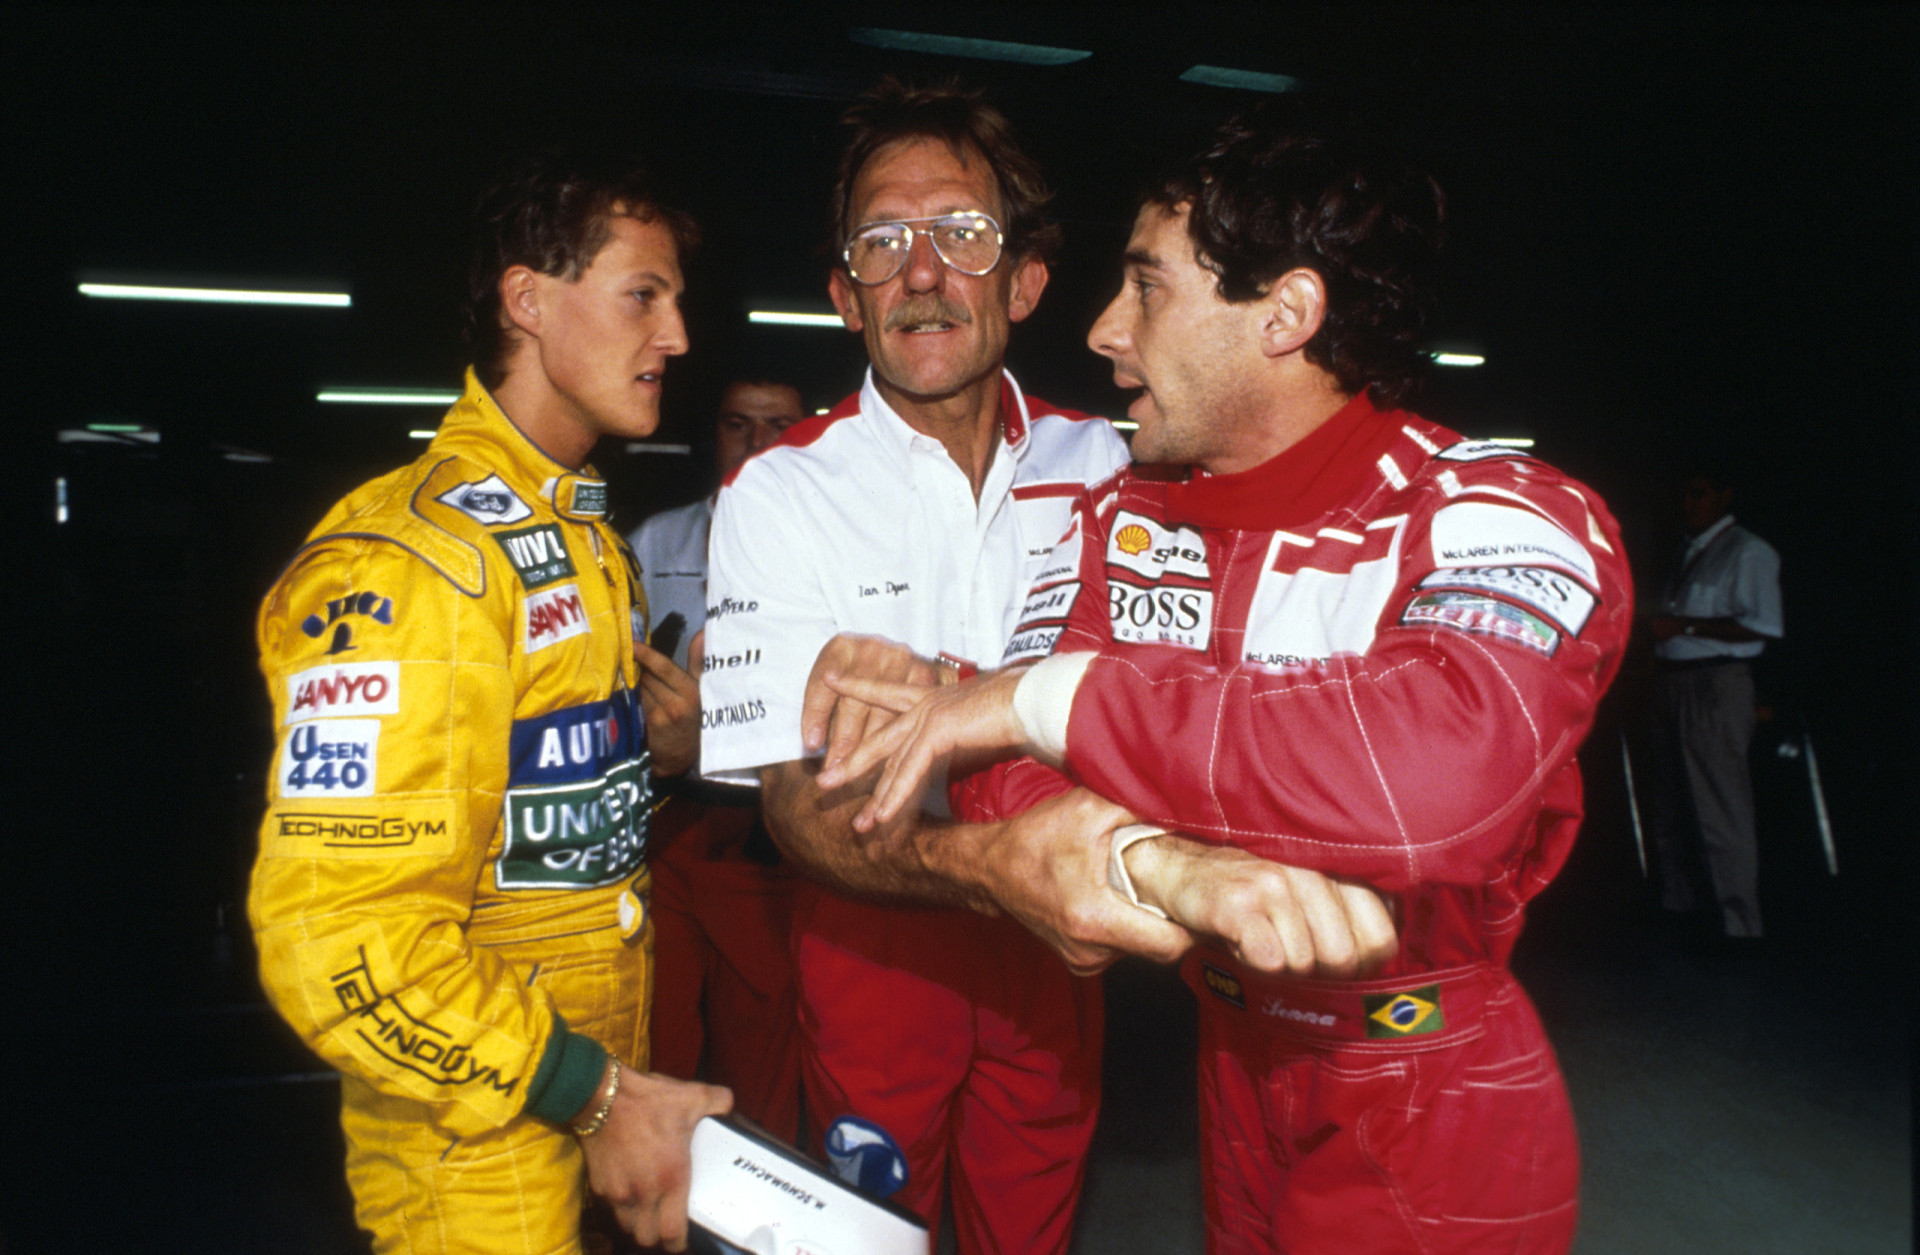 <p>And 1992 was also the year German rising star Michael Schumacher began to make his mark. Senna saw Schumacher as a threat to his supremacy in Formula One, and the relationship between the two was never good. In fact, at a test session for the German Grand Prix, Senna and Schumacher had a confrontation in the pits (pictured), with Senna grabbing Schumacher by the collar and accusing him of endangering him by blocking him on the track.</p><p><a href="https://www.msn.com/en-us/community/channel/vid-7xx8mnucu55yw63we9va2gwr7uihbxwc68fxqp25x6tg4ftibpra?cvid=94631541bc0f4f89bfd59158d696ad7e">Follow us and access great exclusive content every day</a></p>